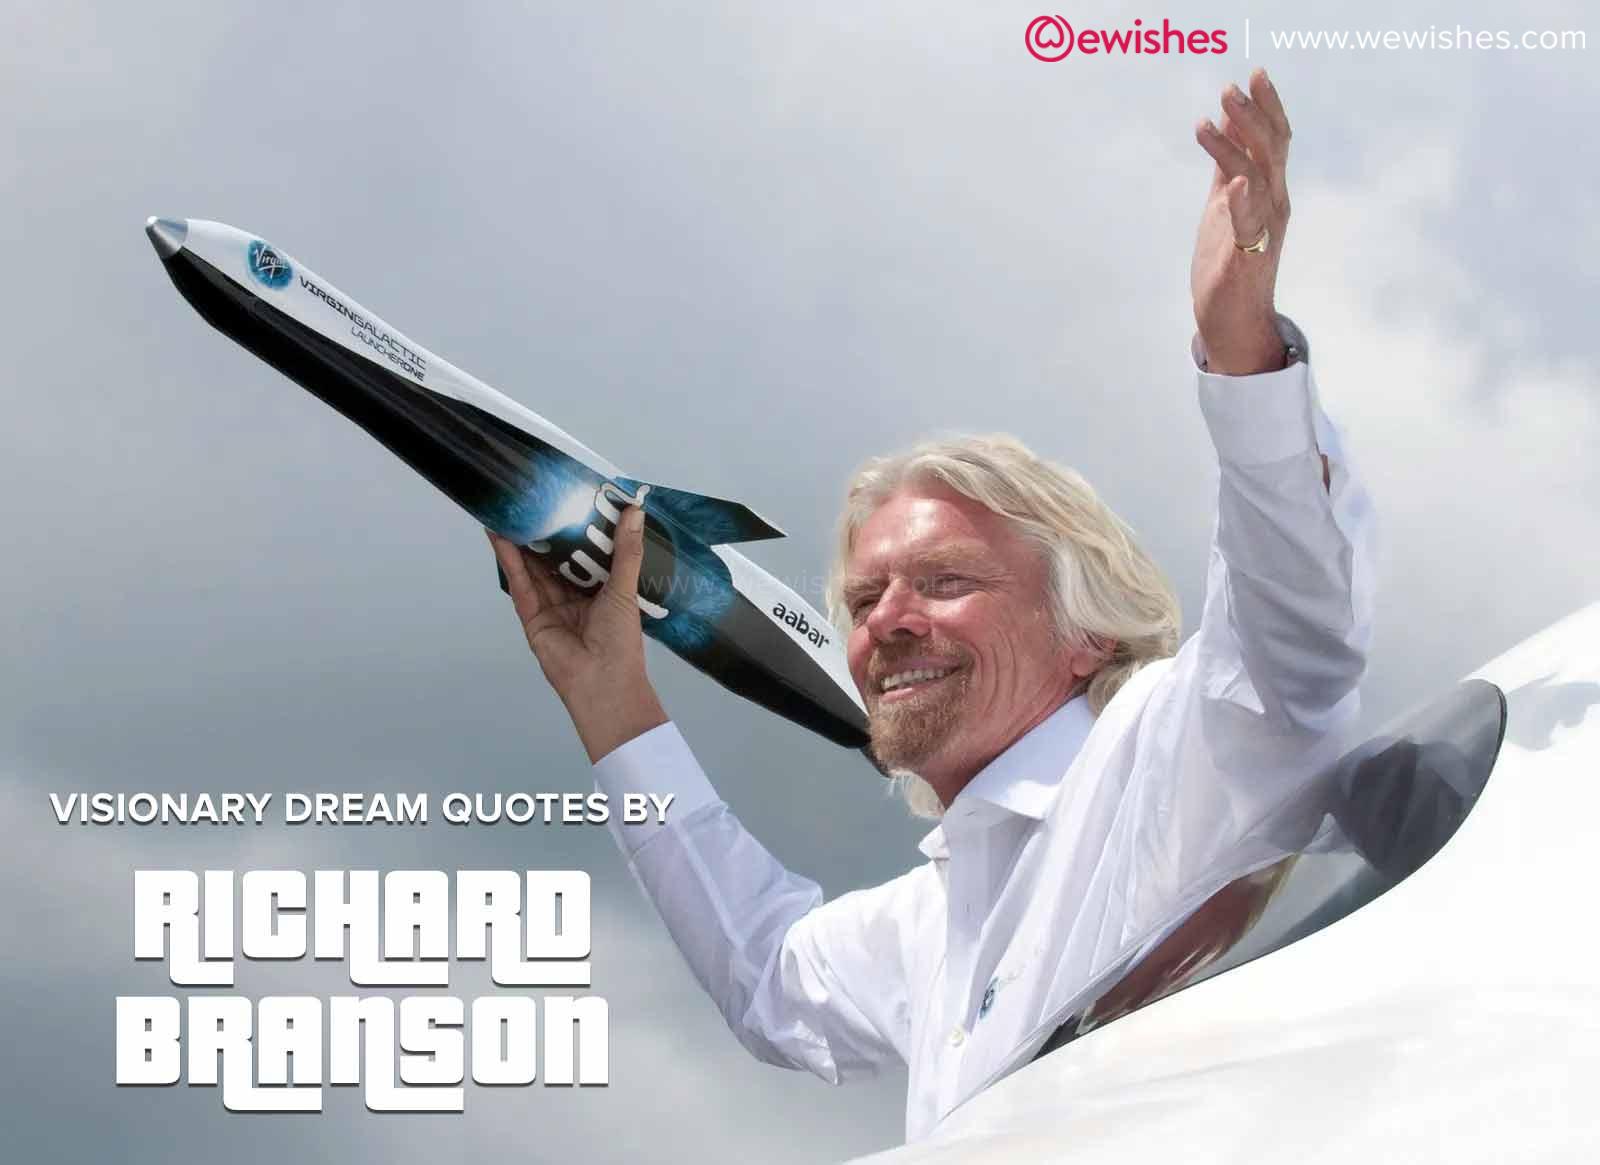 Visionary Dream Quotes by Richard Branson